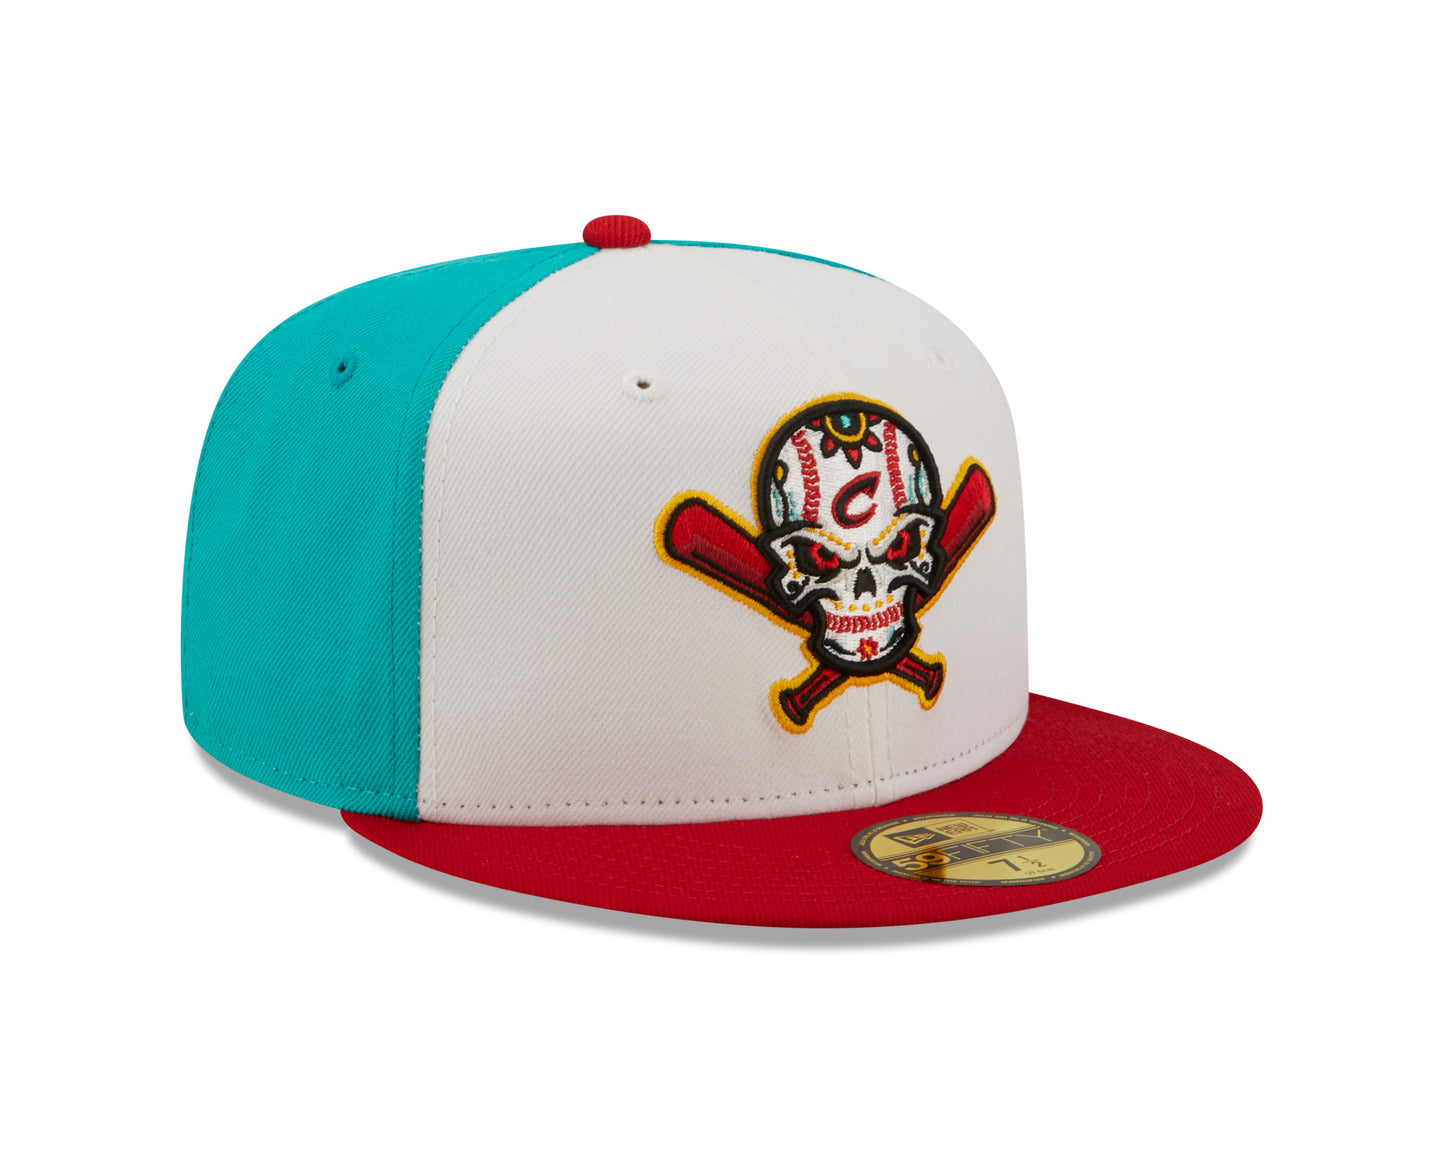 New Era - 59fifty Fitted - MiLB - COPA - Columbus Clippers - White/Teal/Real - Headz Up 